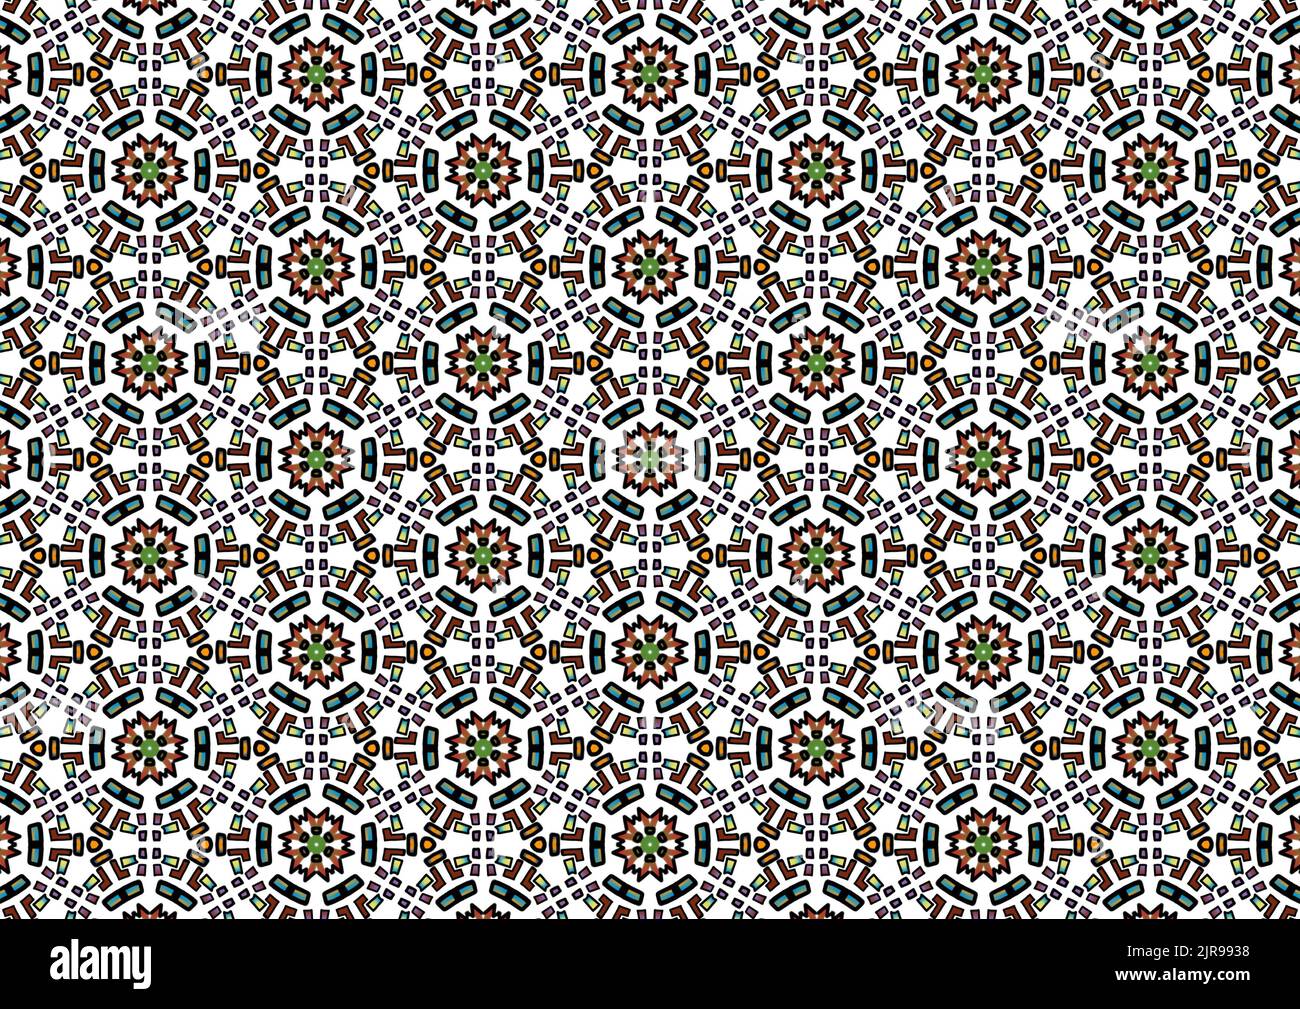 The pattern geometry shapes in mosaic style Stock Photo